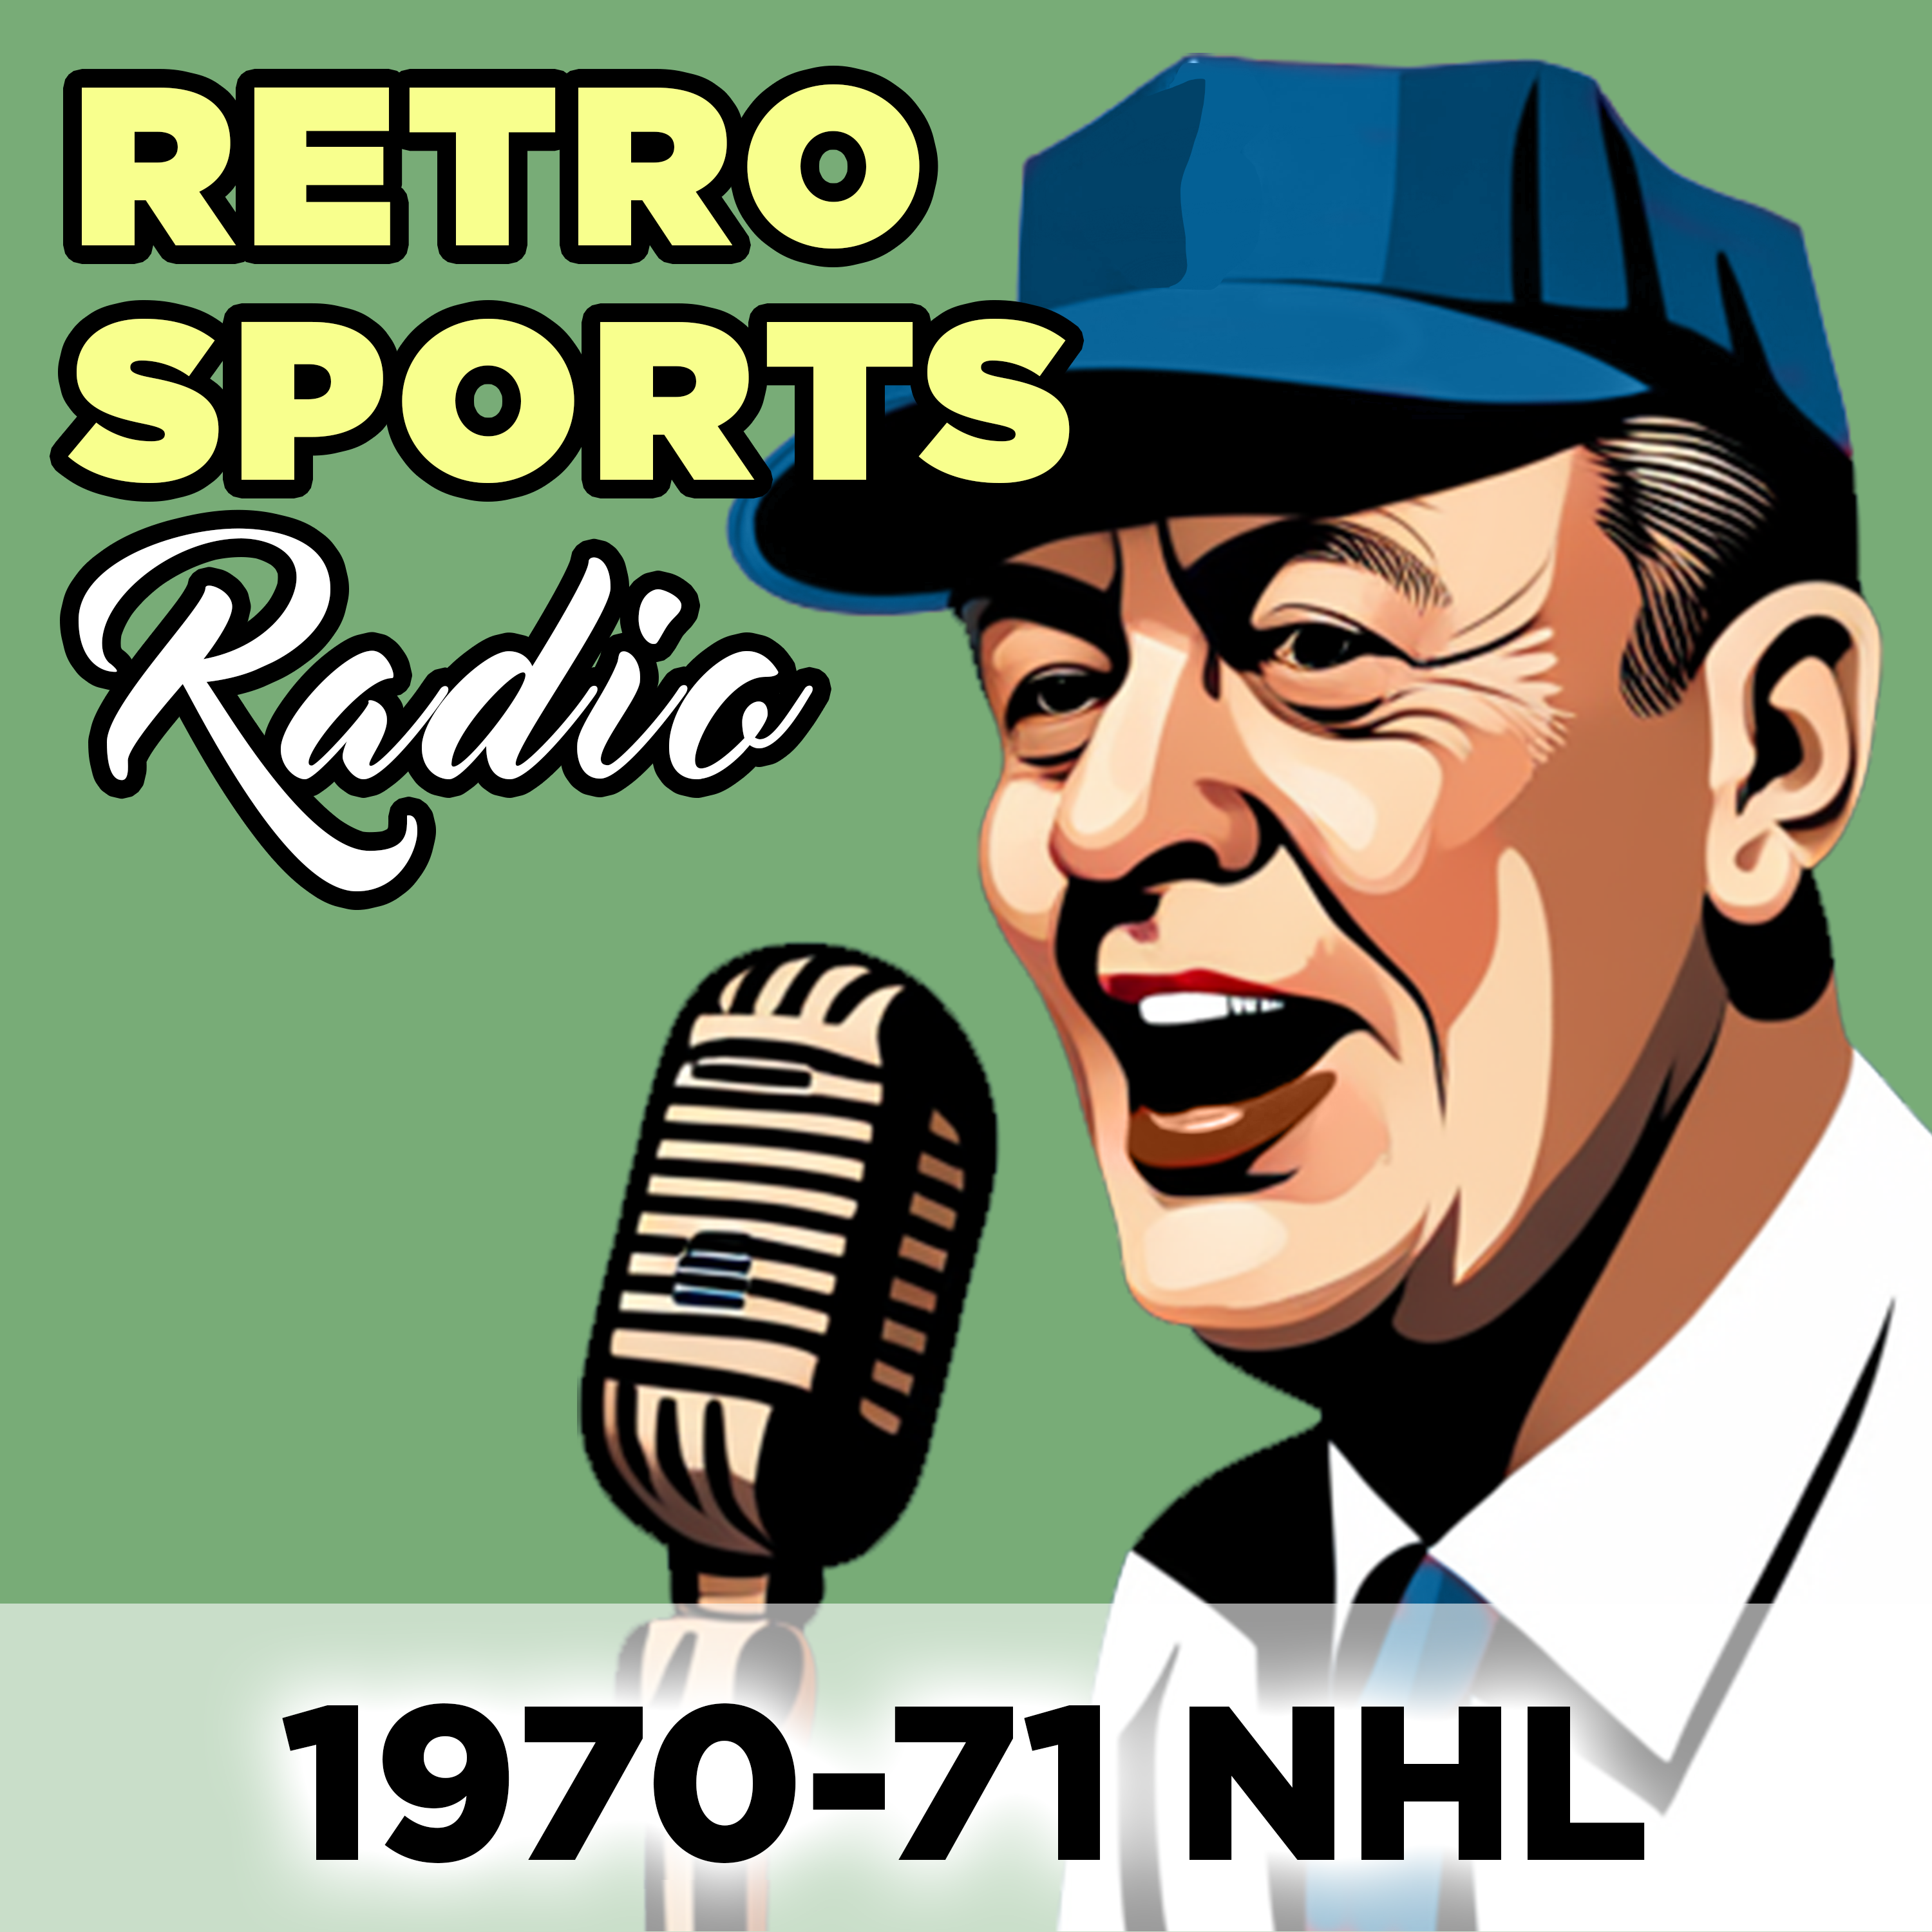 1971-May-18 • NHL Stanley Cup G7 • Montreal Canadiens at Chicago Blackhawks - Classic Hockey Radio Broadcast